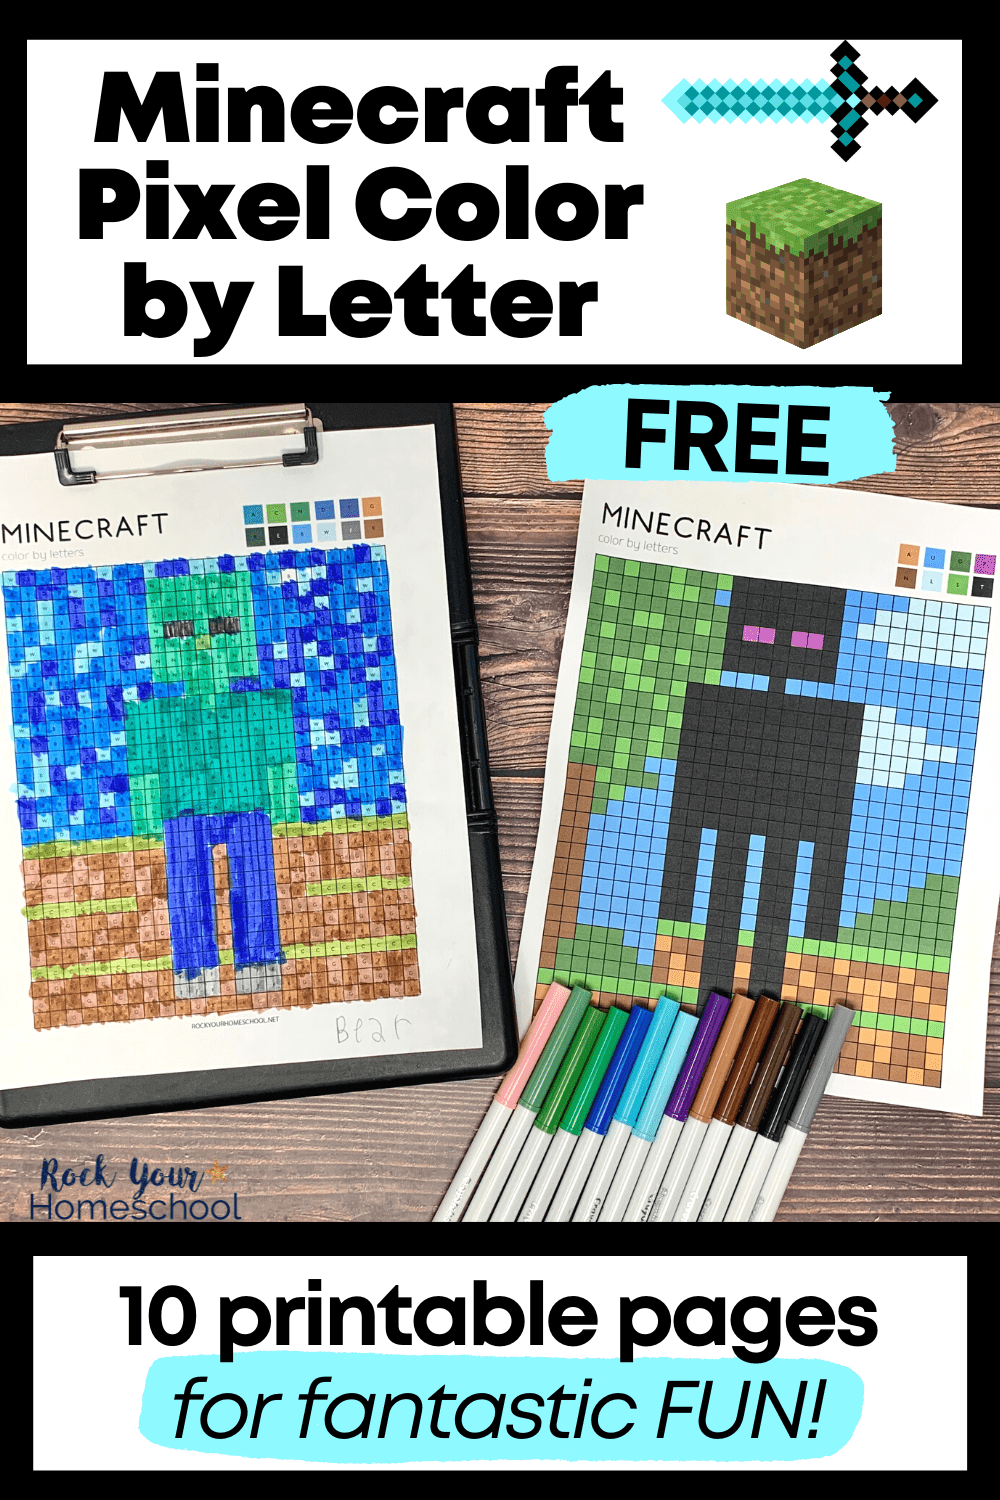 Minecraft Color by Letter Pixel Art for Fun Activities (10 Free Pages)